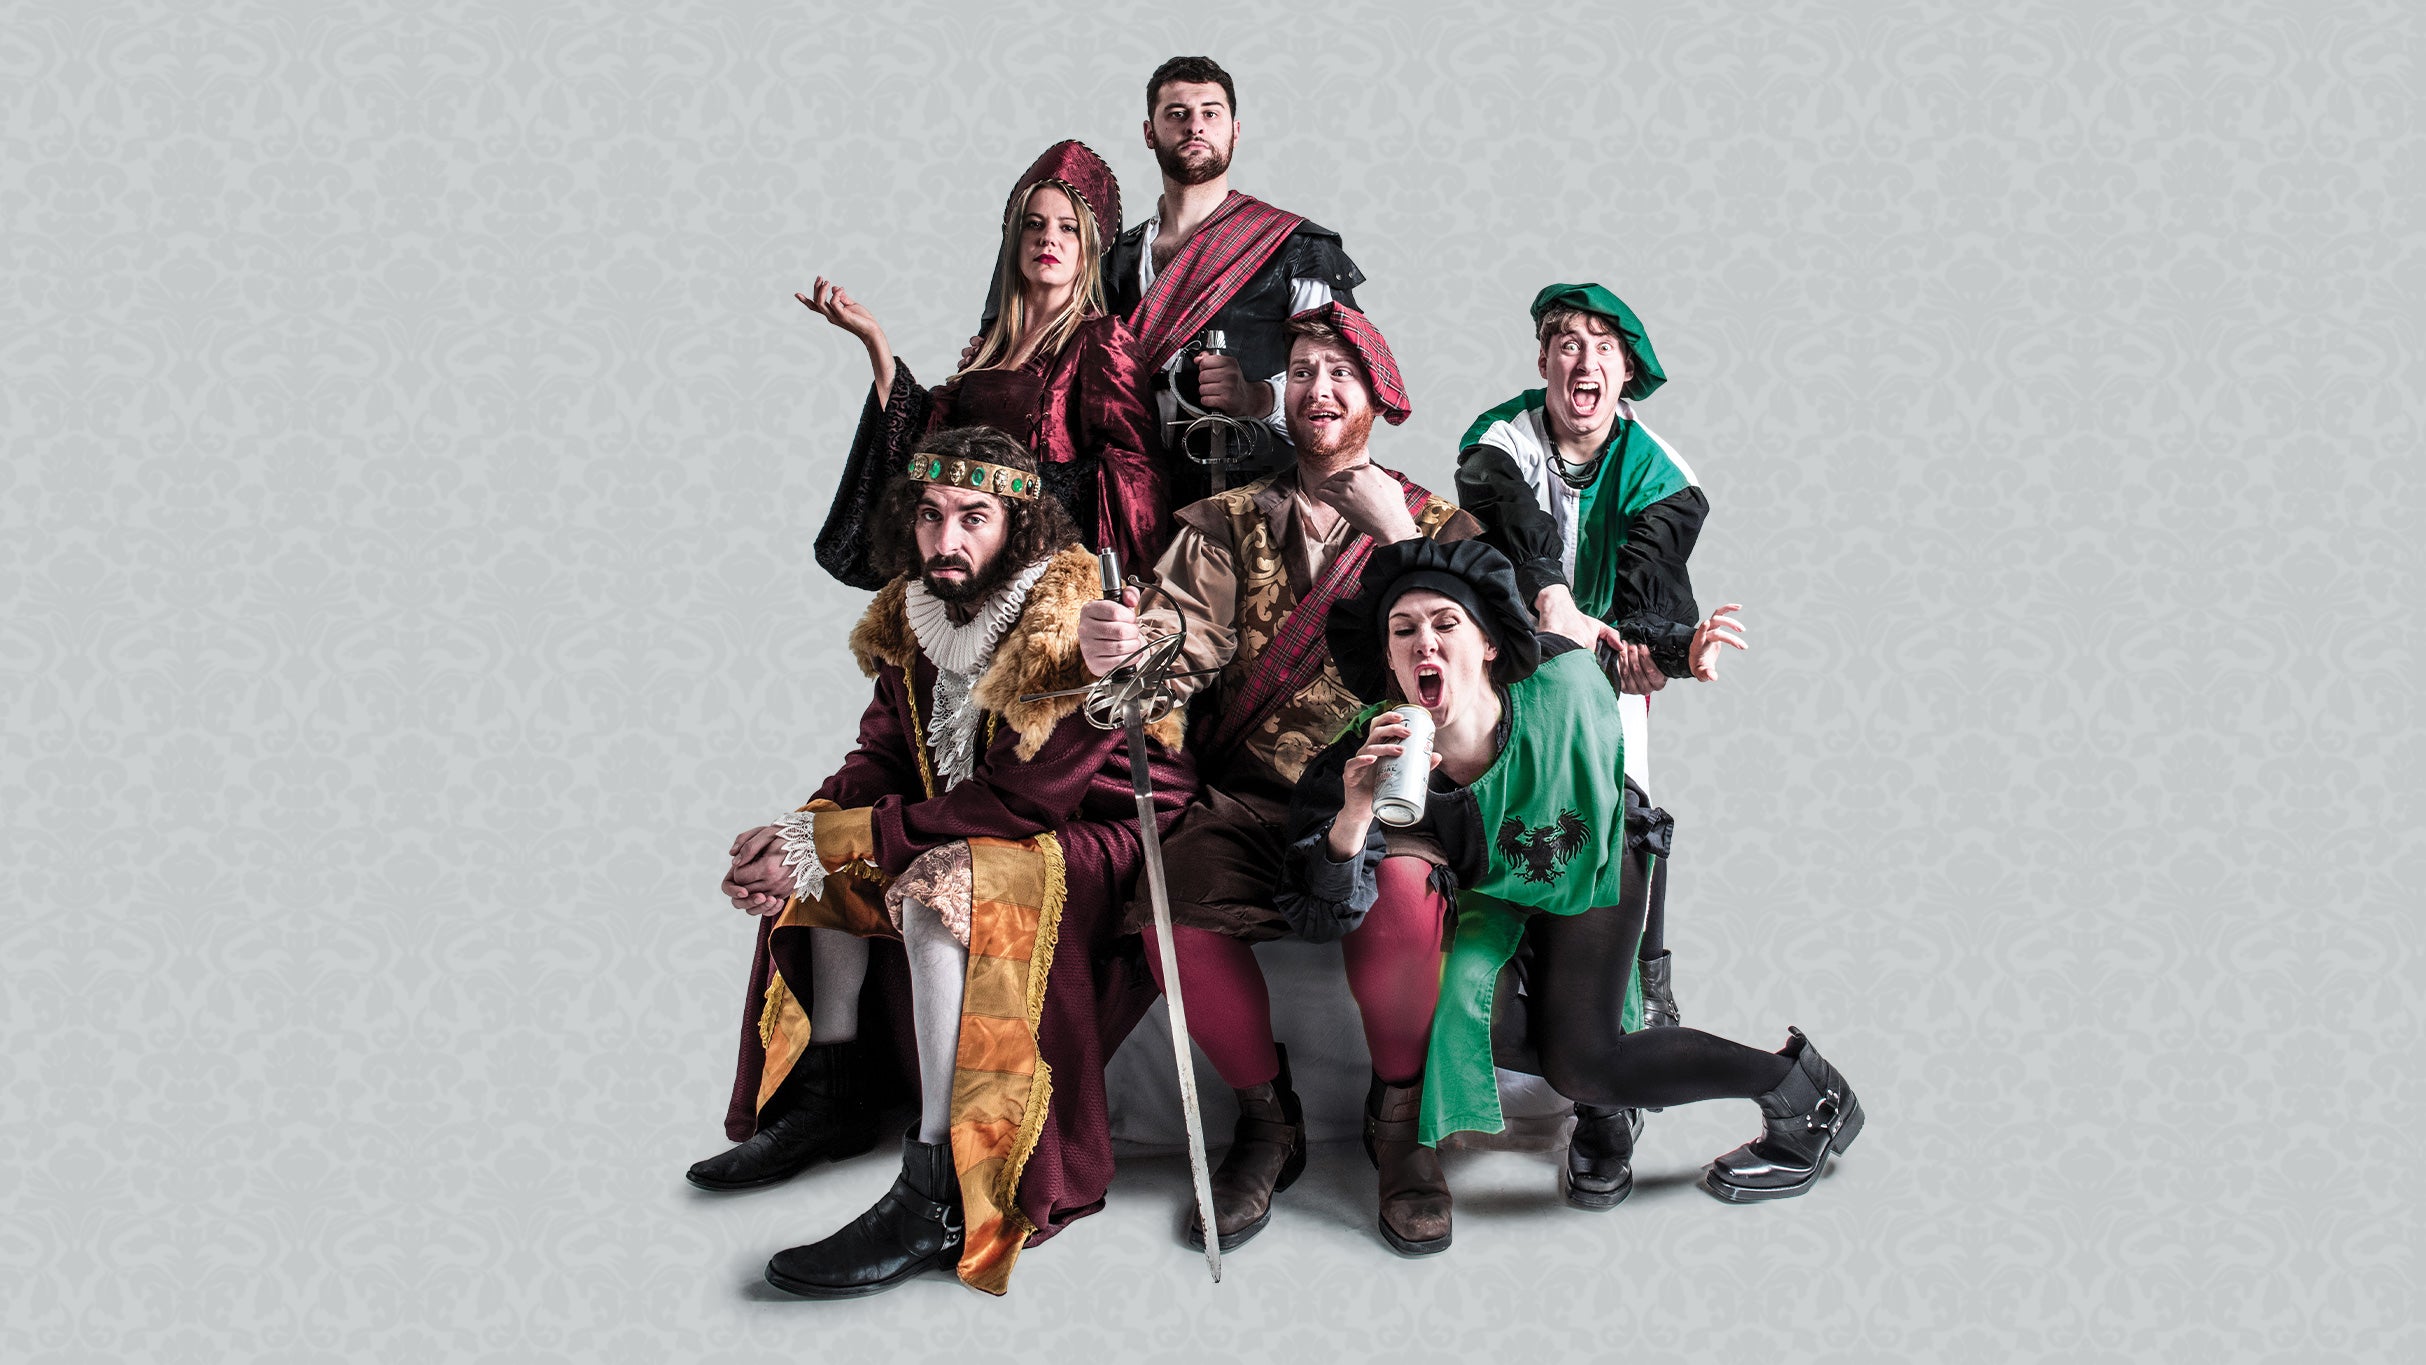 Sh!t-faced Shakespeare - Macbeth in Melbourne promo photo for Exclusive presale offer code